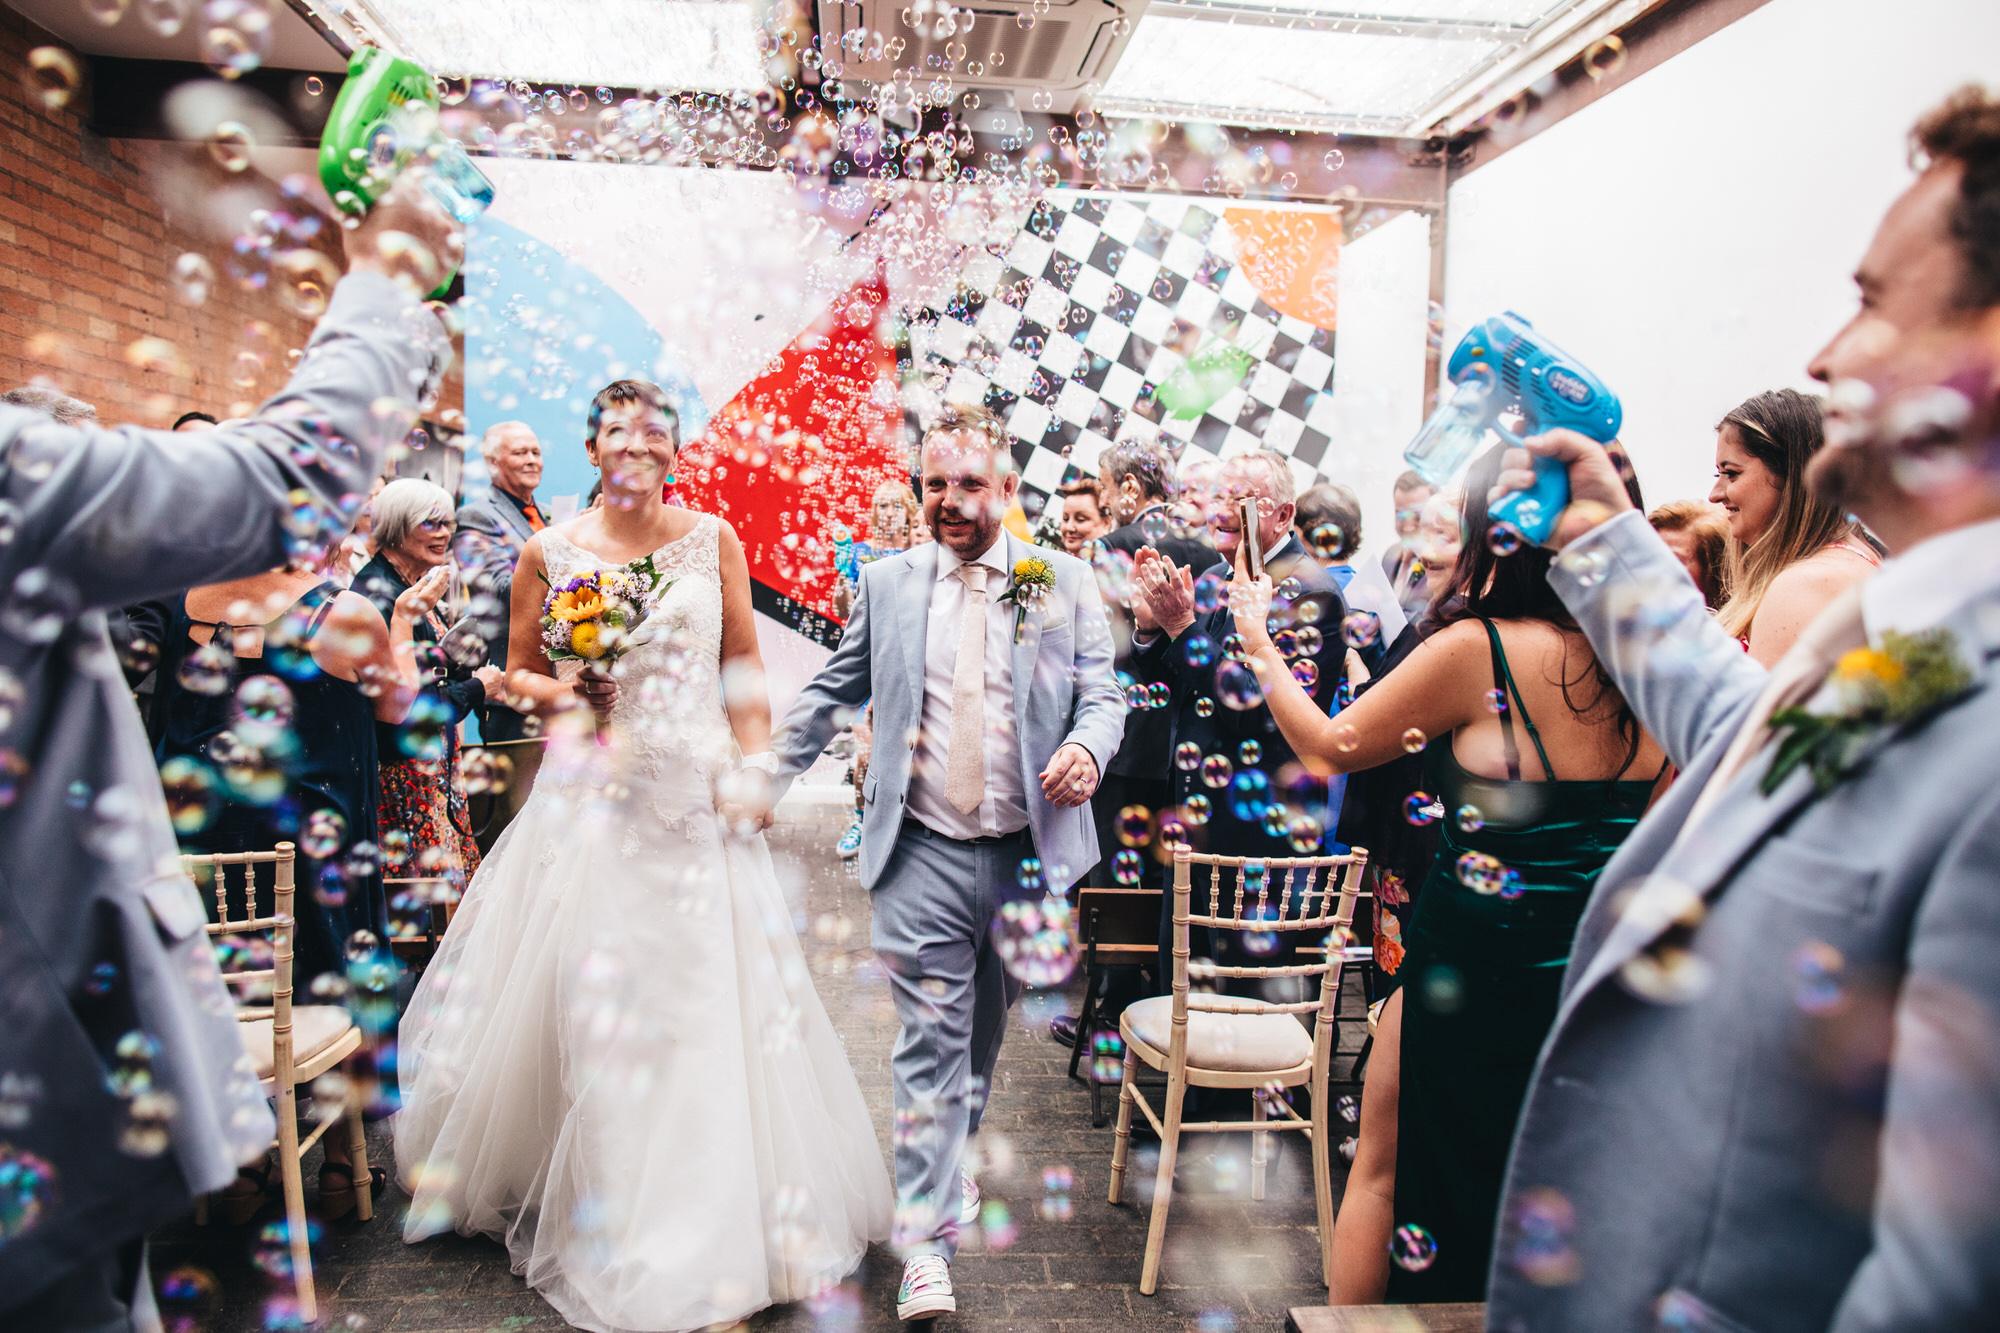 guests blast water gun bubbles at bride and groom walking down aisle together